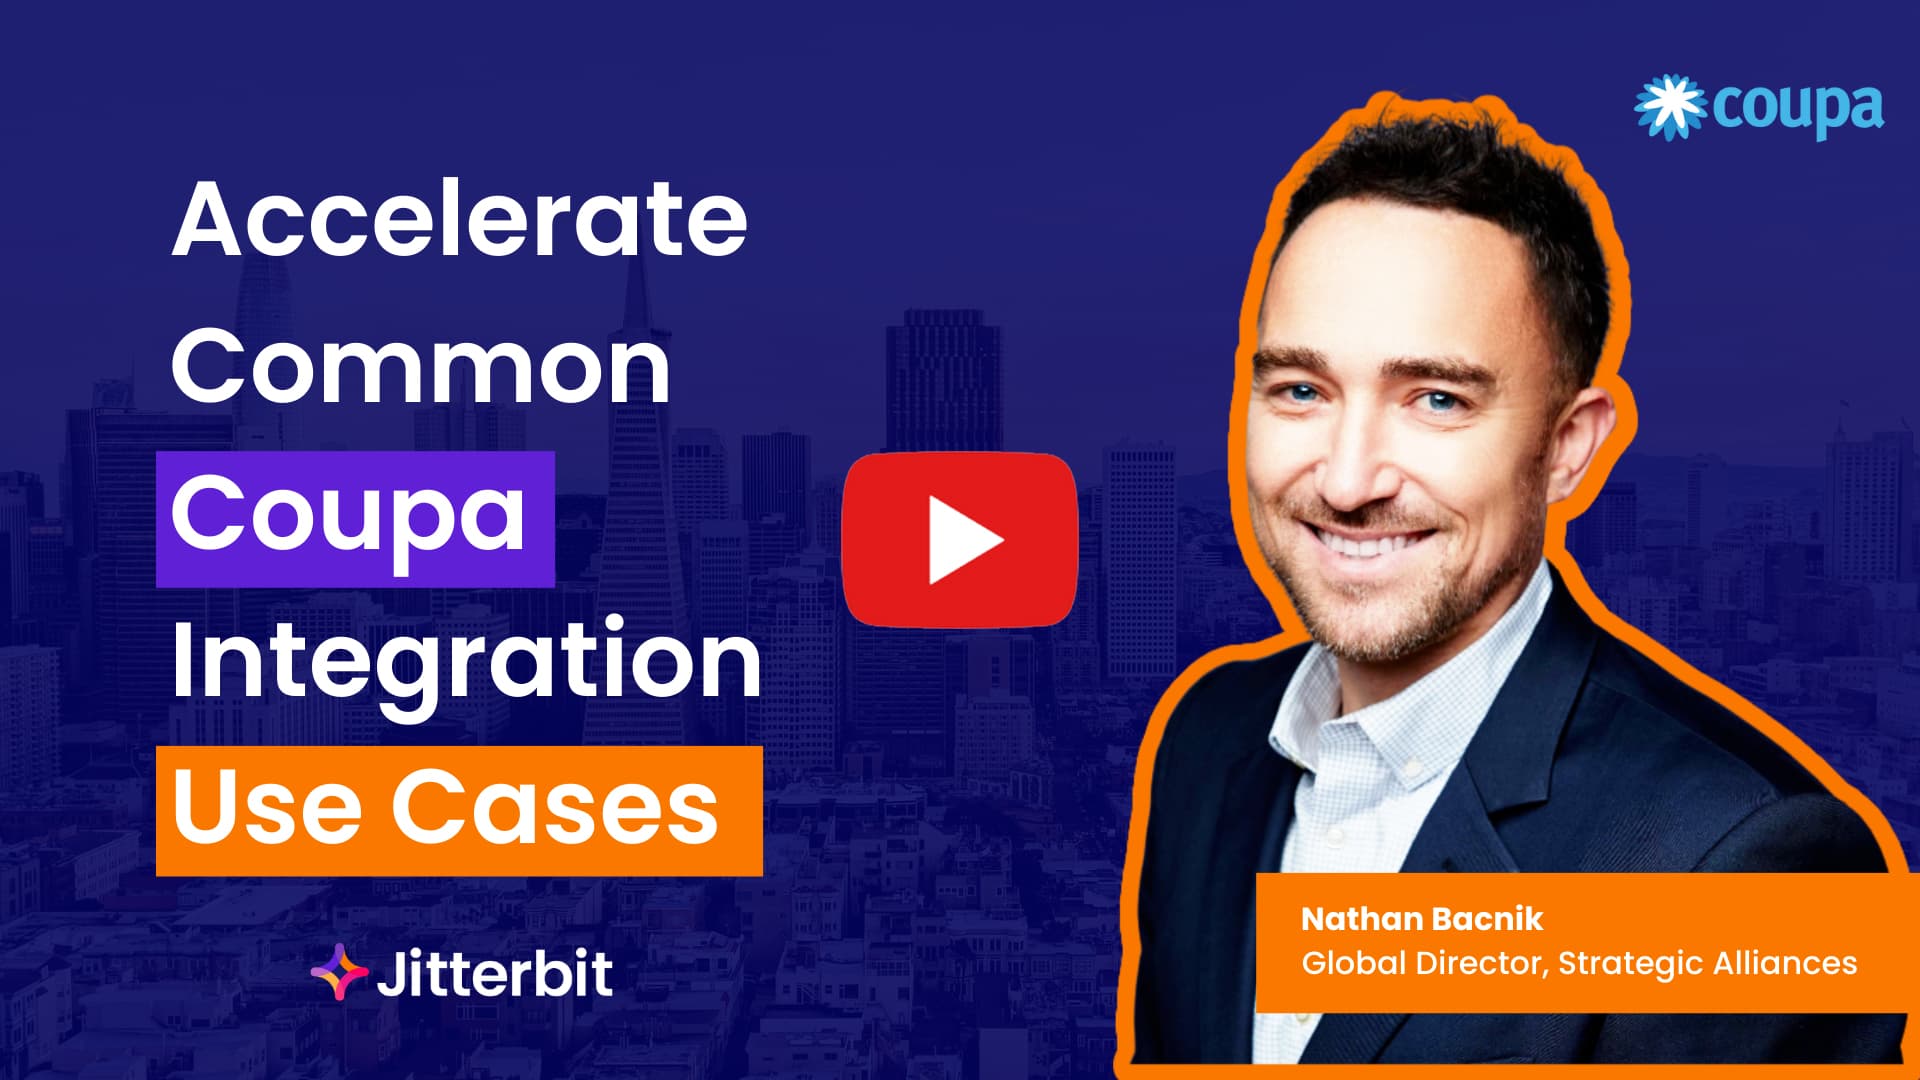 Accelerate Common Coupa Use Cases With Jitterbit